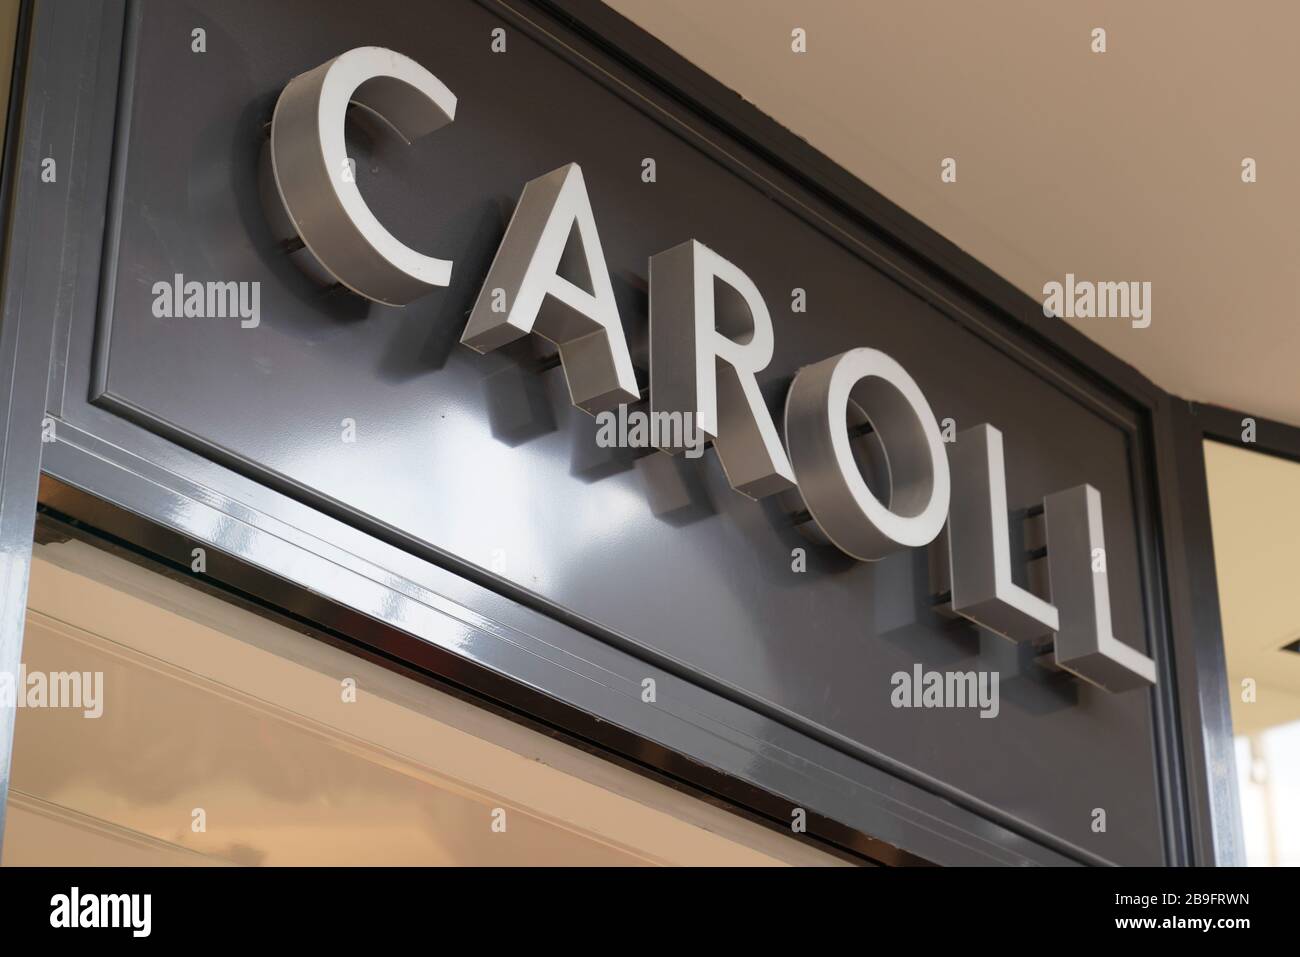 Bordeaux , Aquitaine / France - 09 24 2019 : Caroll paris clothing store  french shop front sign in street for luxury women Stock Photo - Alamy